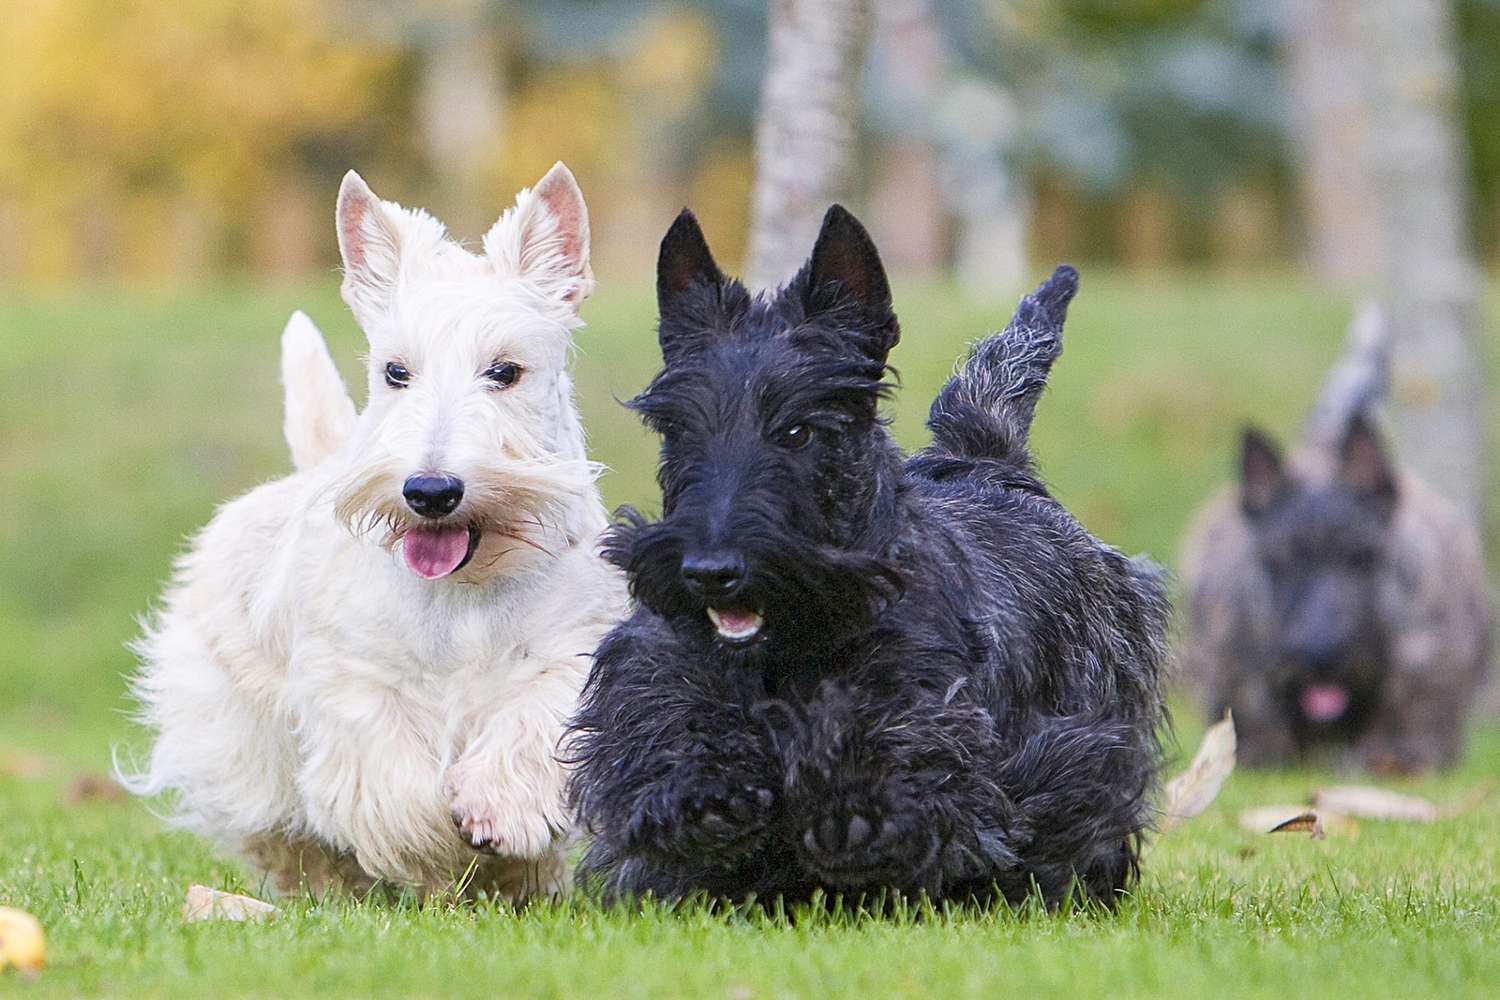 black and white scottish terriers running together in a park